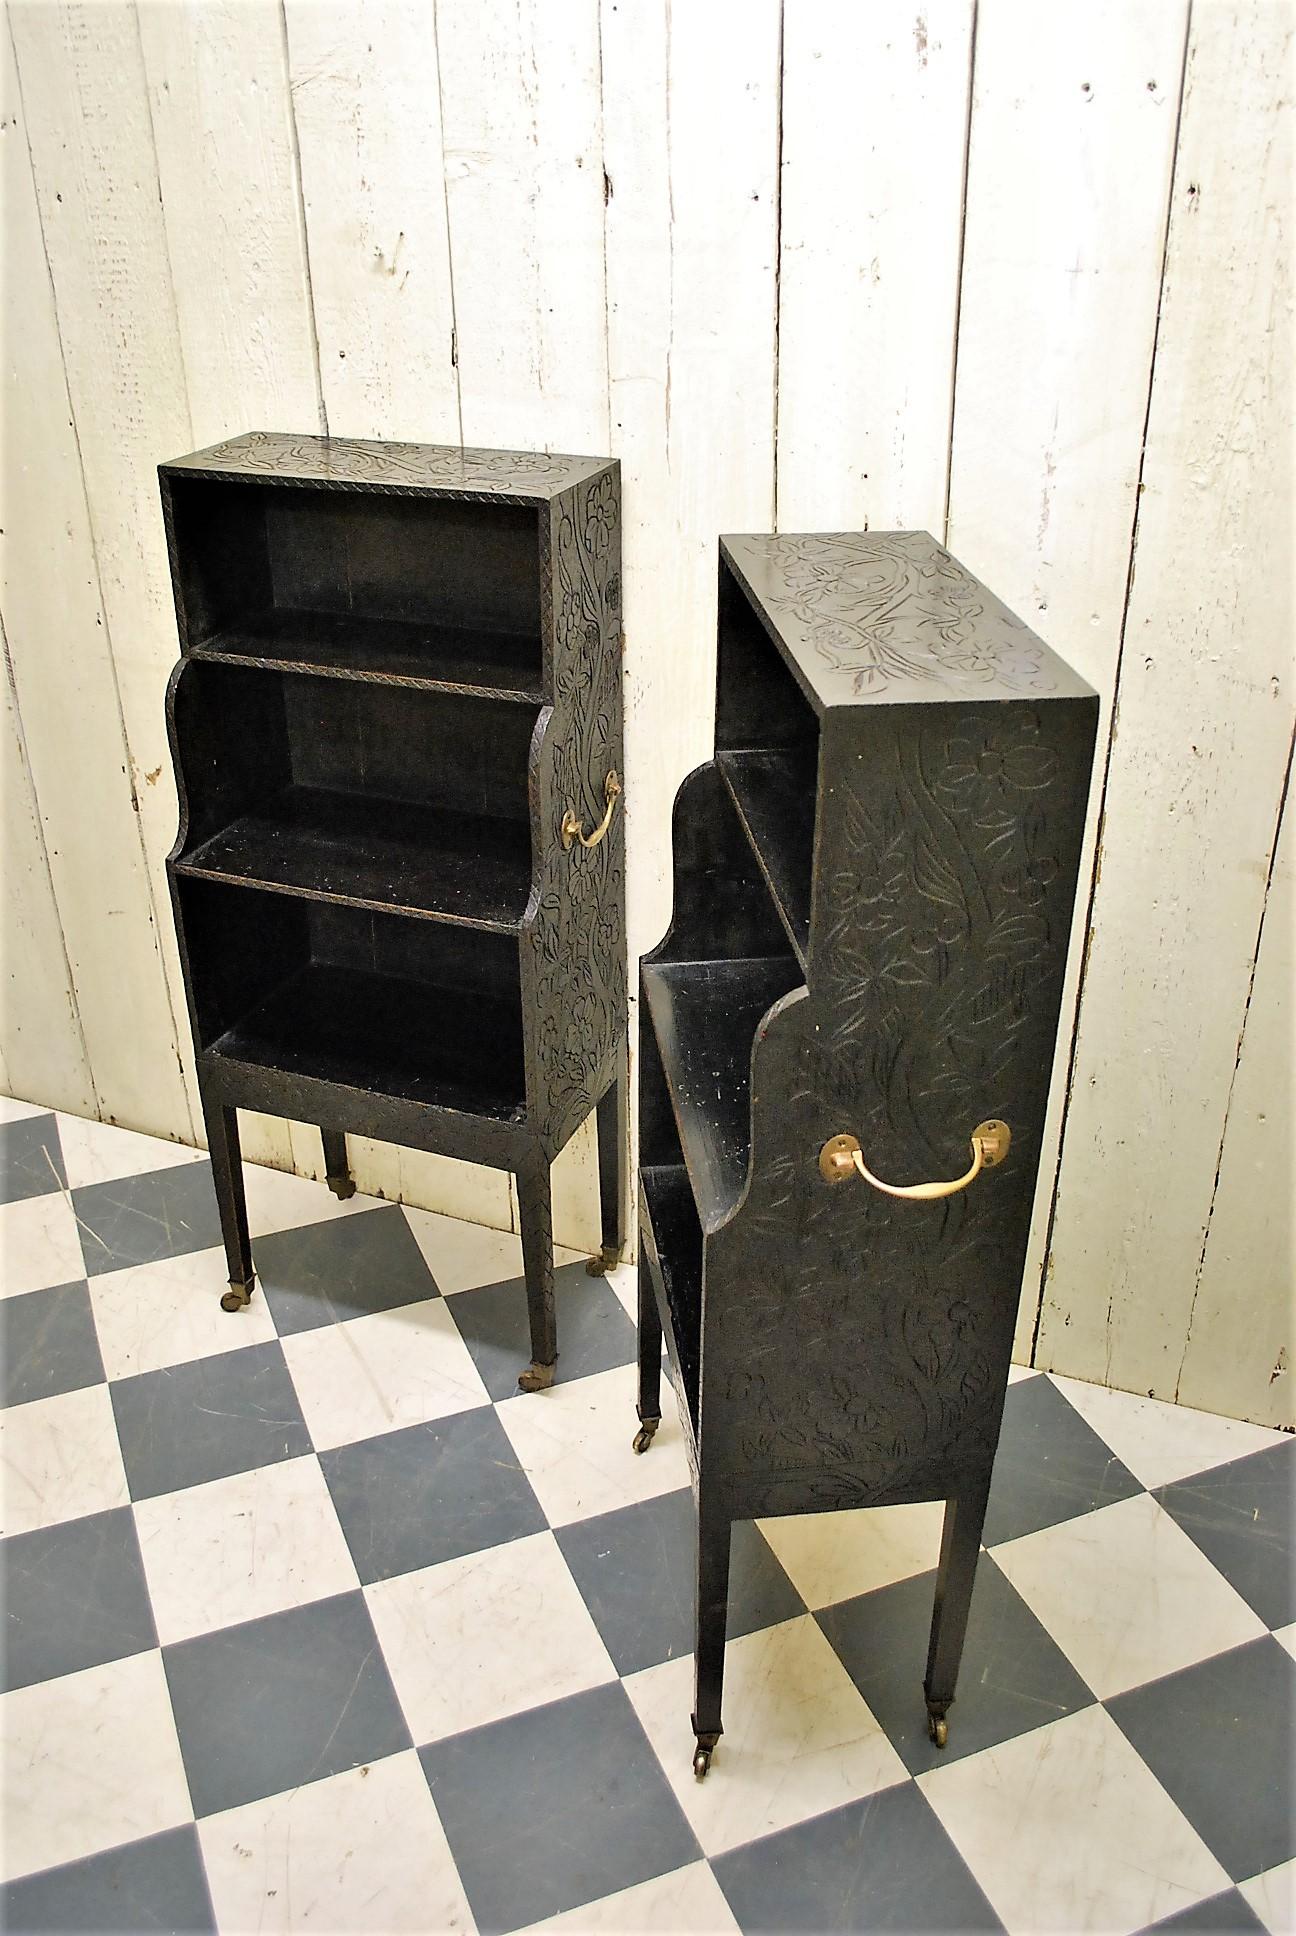 A rare pair of ebonized pine waterfall bookcases, in the Regency manner. Standing on tapered legs terminating in brass castors. Decorated with carved and stamped foliage. Matching brass carrying handles on both pieces. Hard to find one and even more